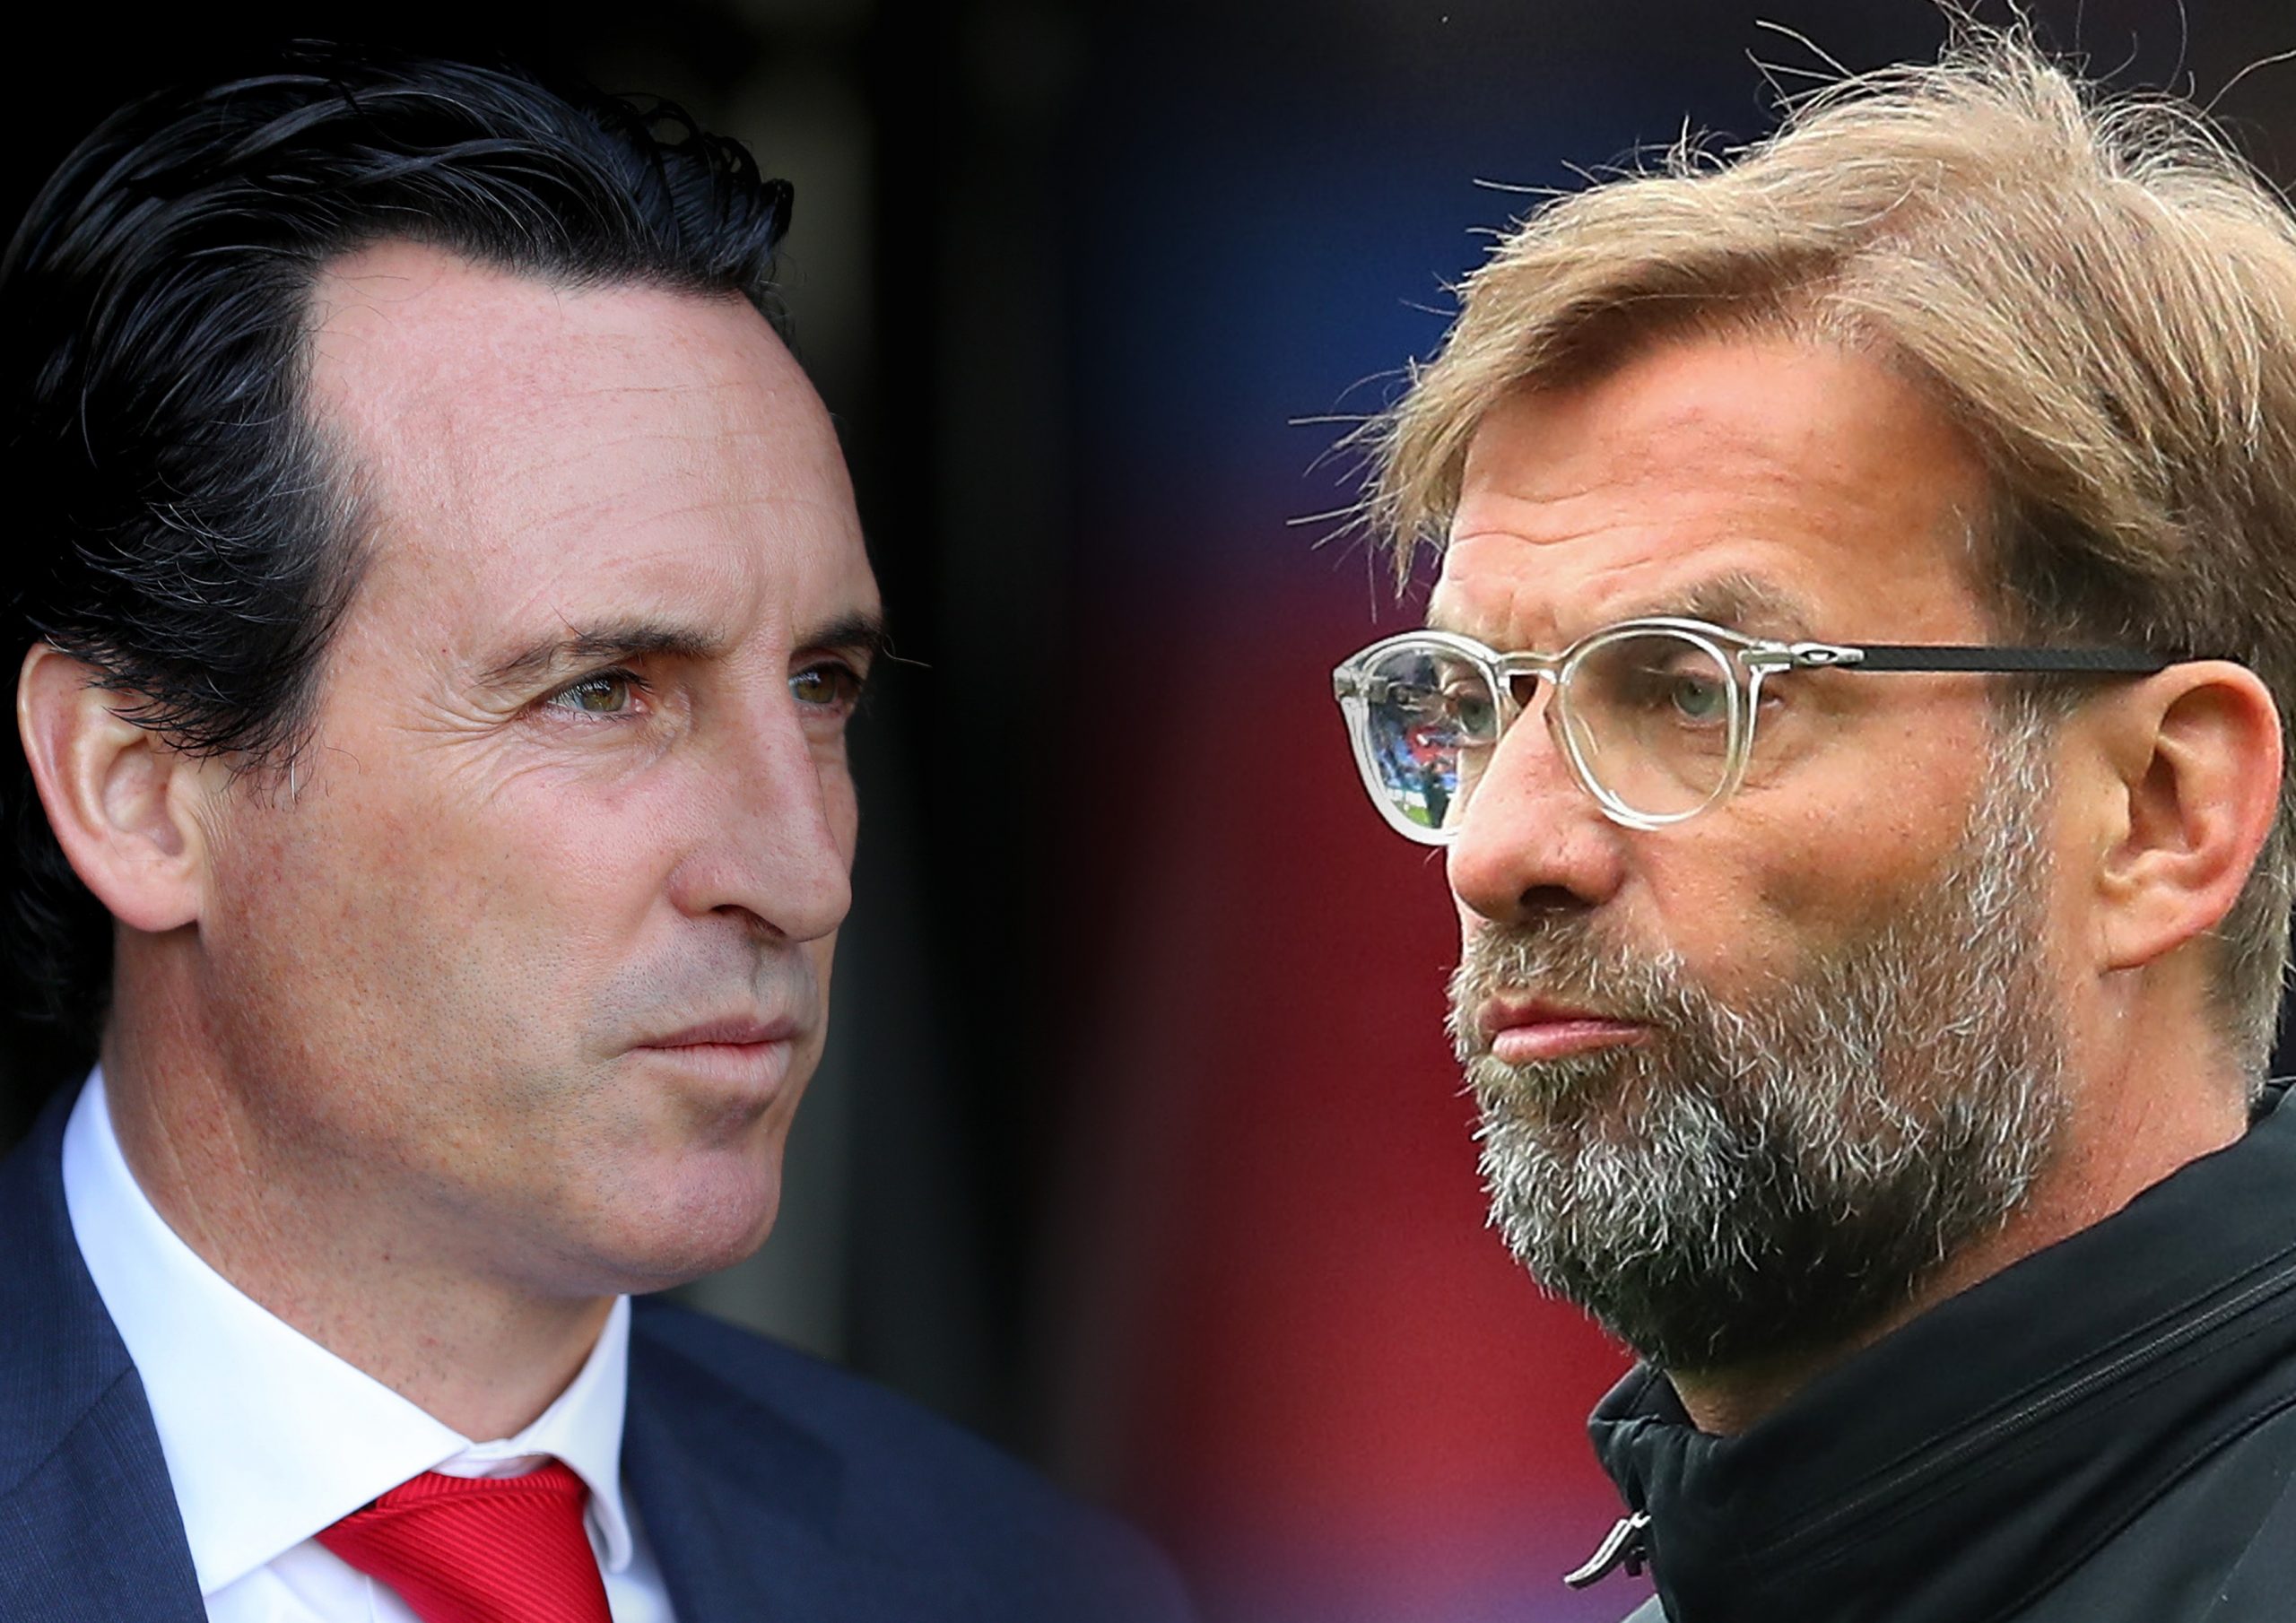 Unai Emery (left) and Jugern Klopp (right) clash as Villareal face Liverpool ahead